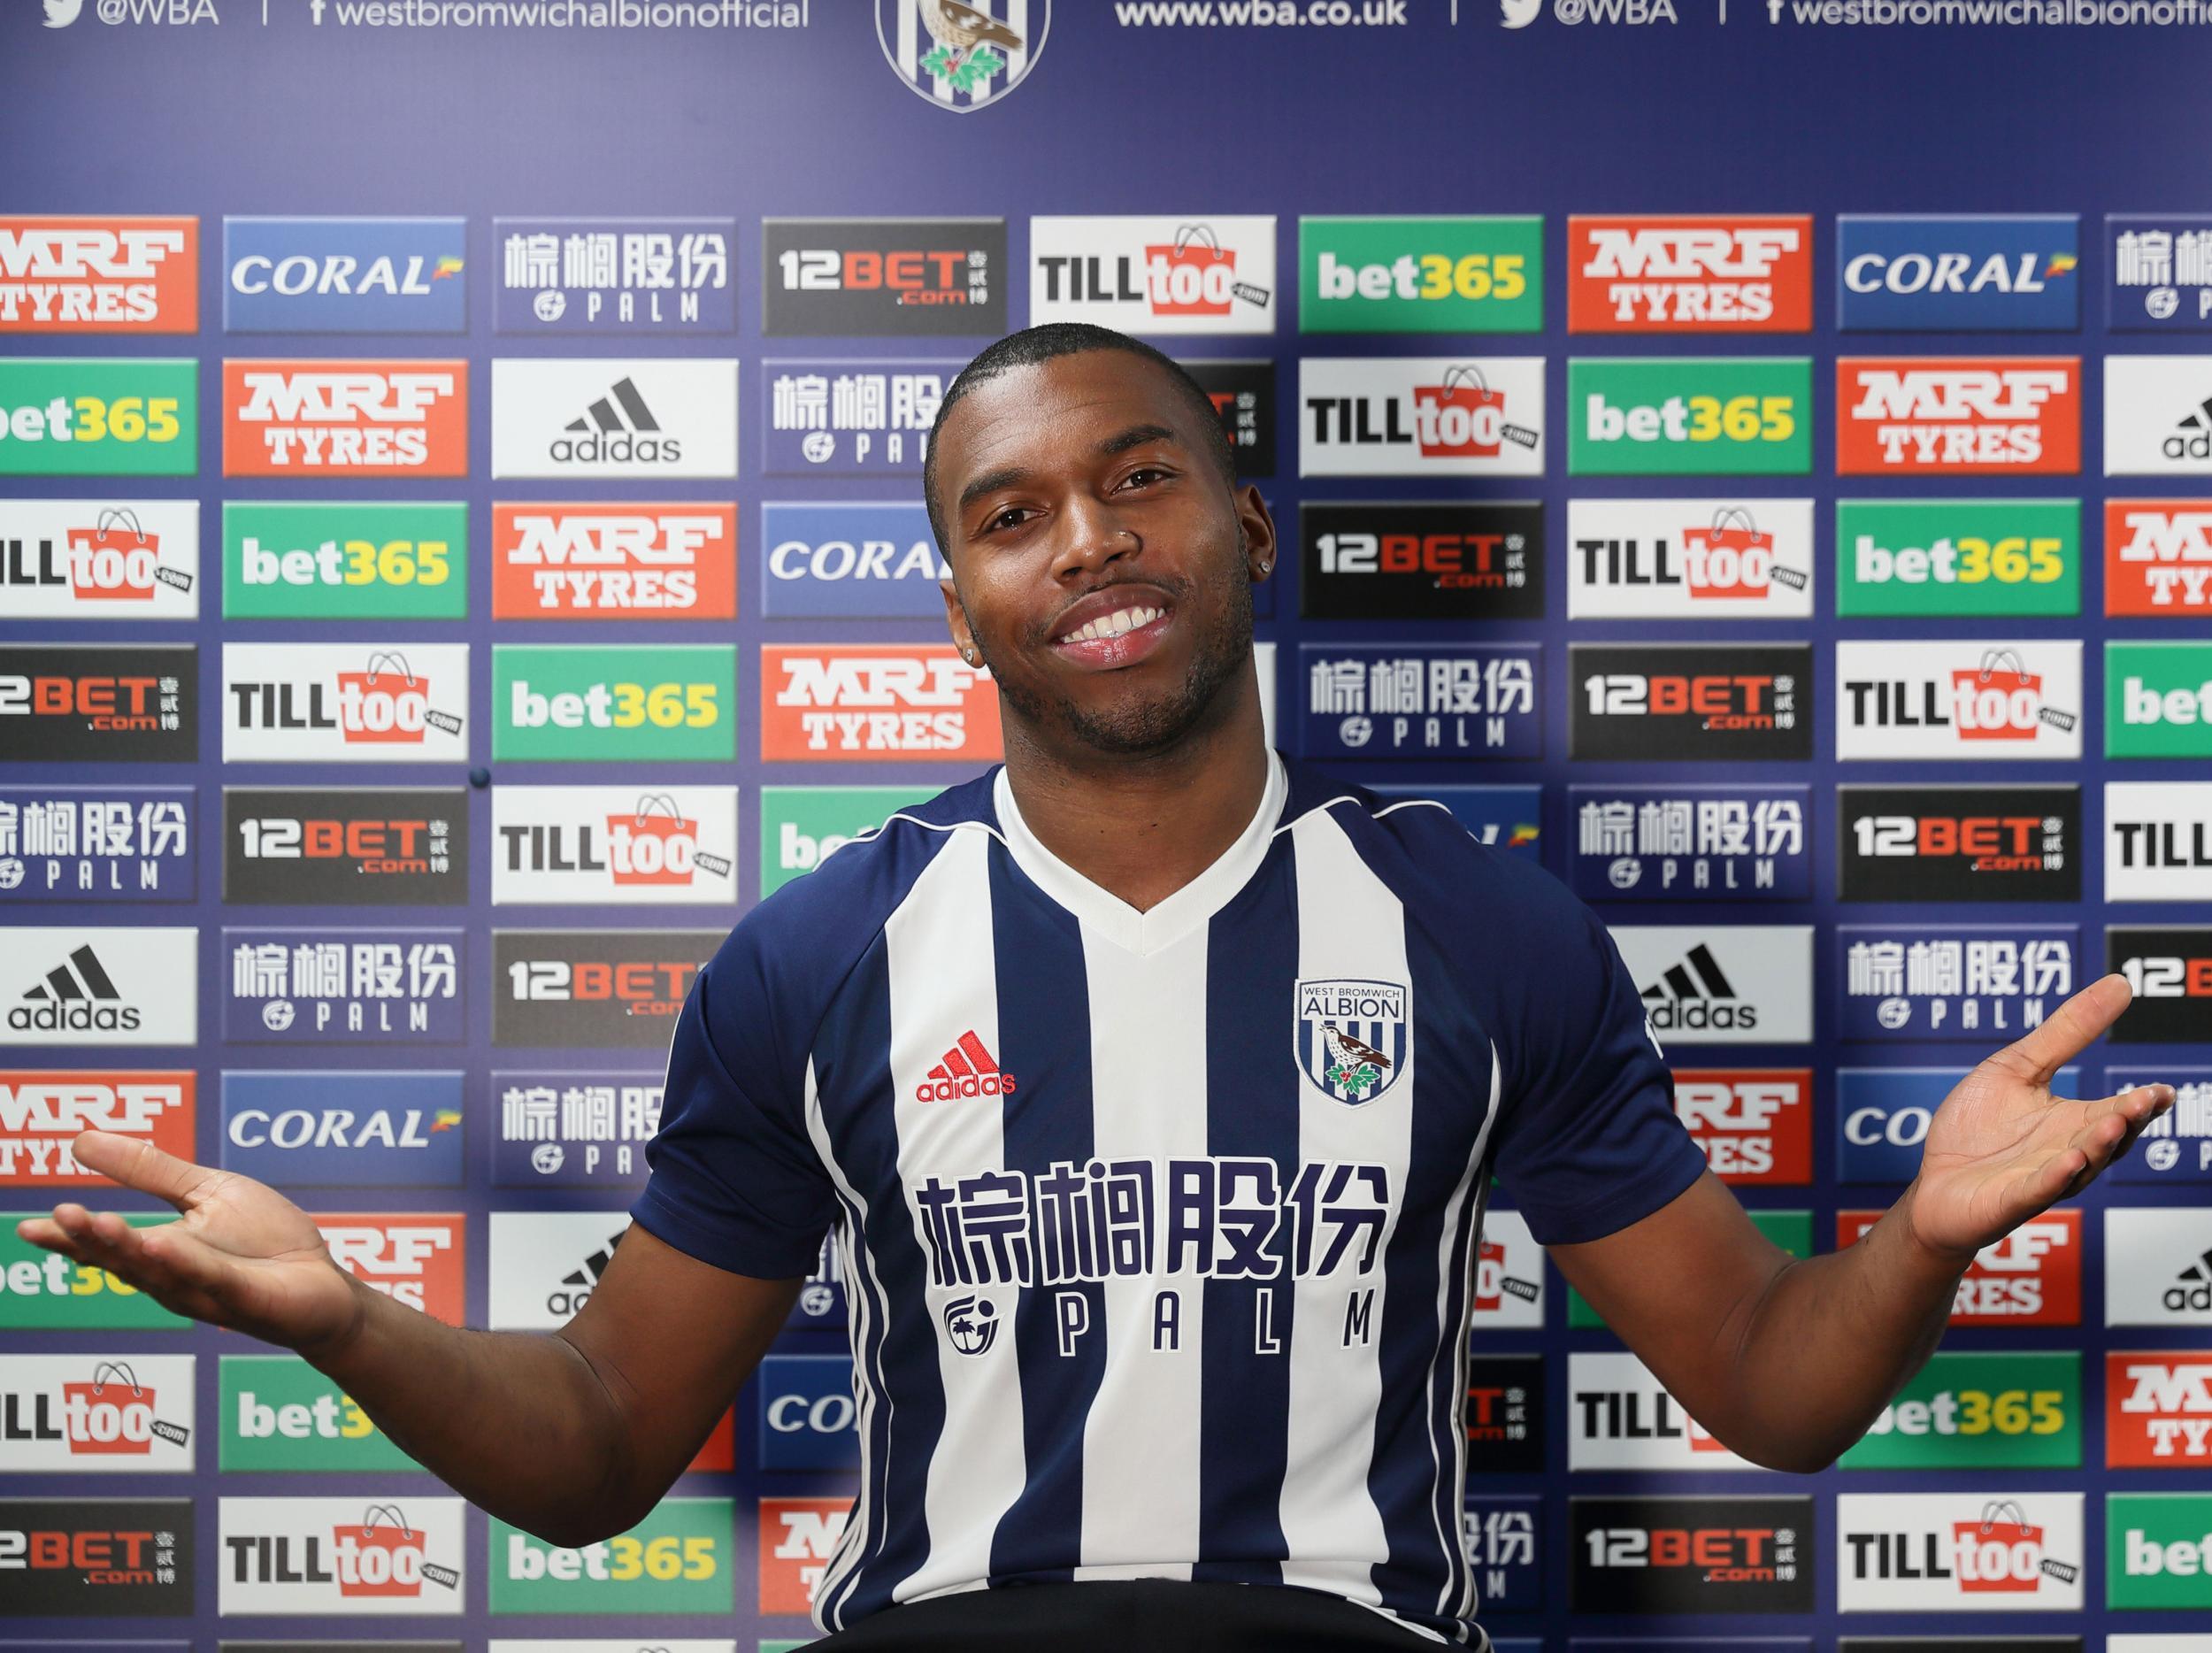 Daniel Sturridge joined West Brom from Liverpool on Monday evening